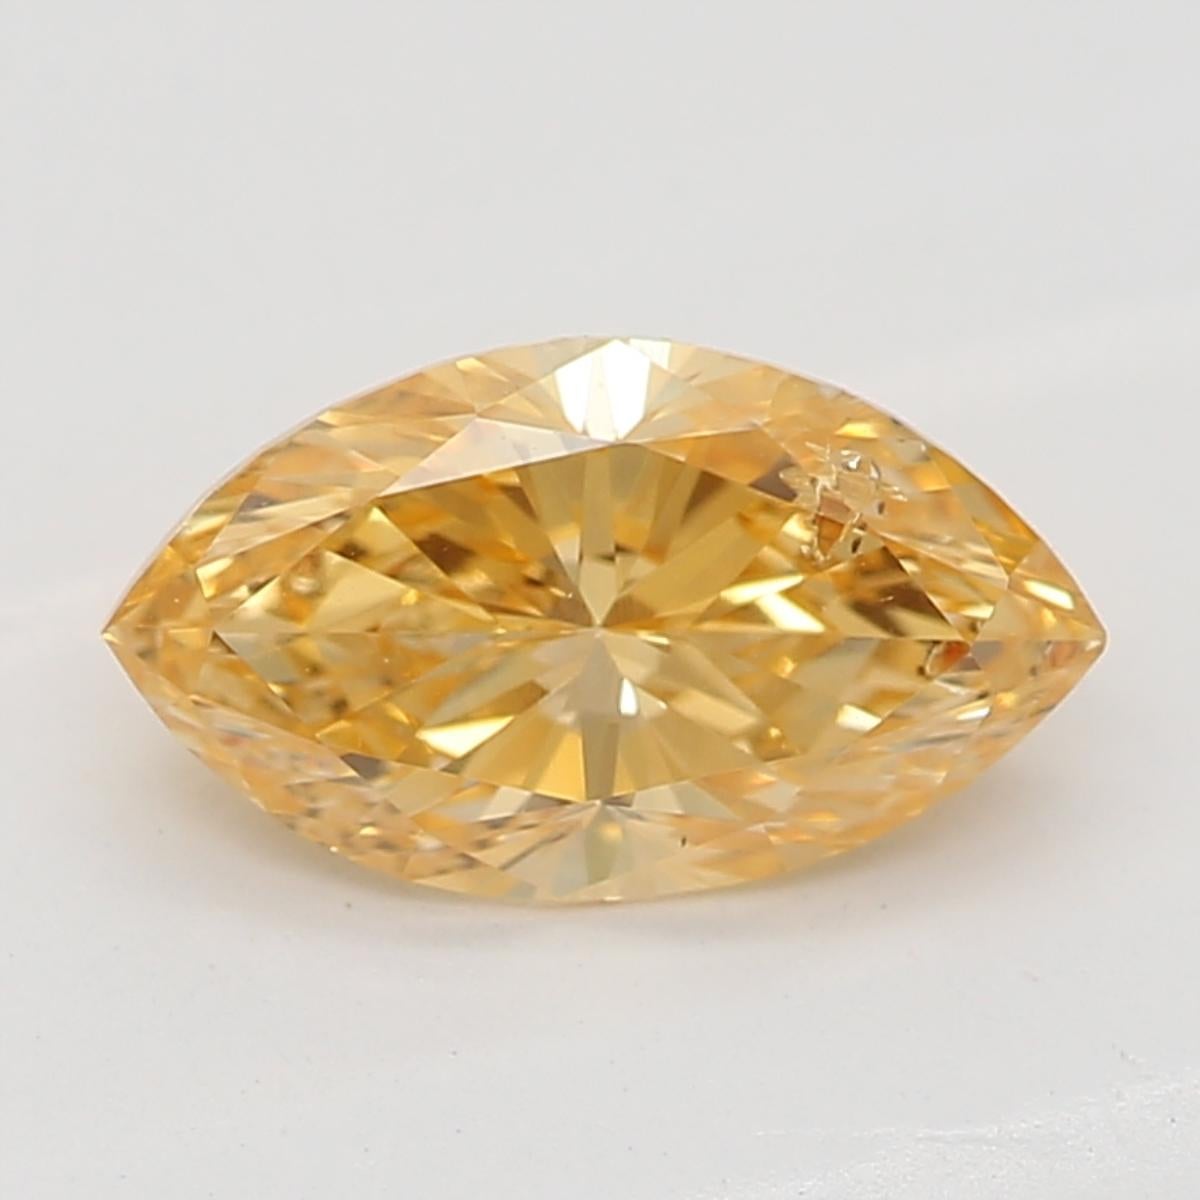 *100% NATURAL FANCY COLOUR DIAMOND*

✪ Diamond Details ✪

➛ Shape: Marquise
➛ Colour Grade: Fancy Intense Orangy Yellow
➛ Carat: 0.50
➛ GIA Certified 

^FEATURES OF THE DIAMOND^

Our fancy intense orangy-yellow diamond is a rare and stunning diamond